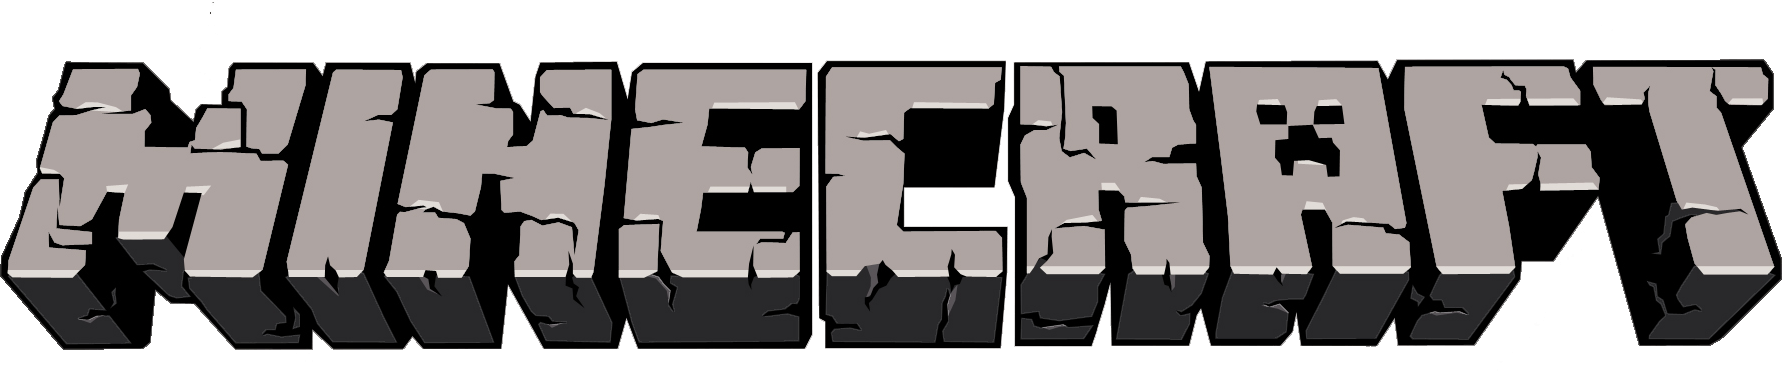 Minecraft Logo.png - Minecraft, Transparent background PNG HD thumbnail